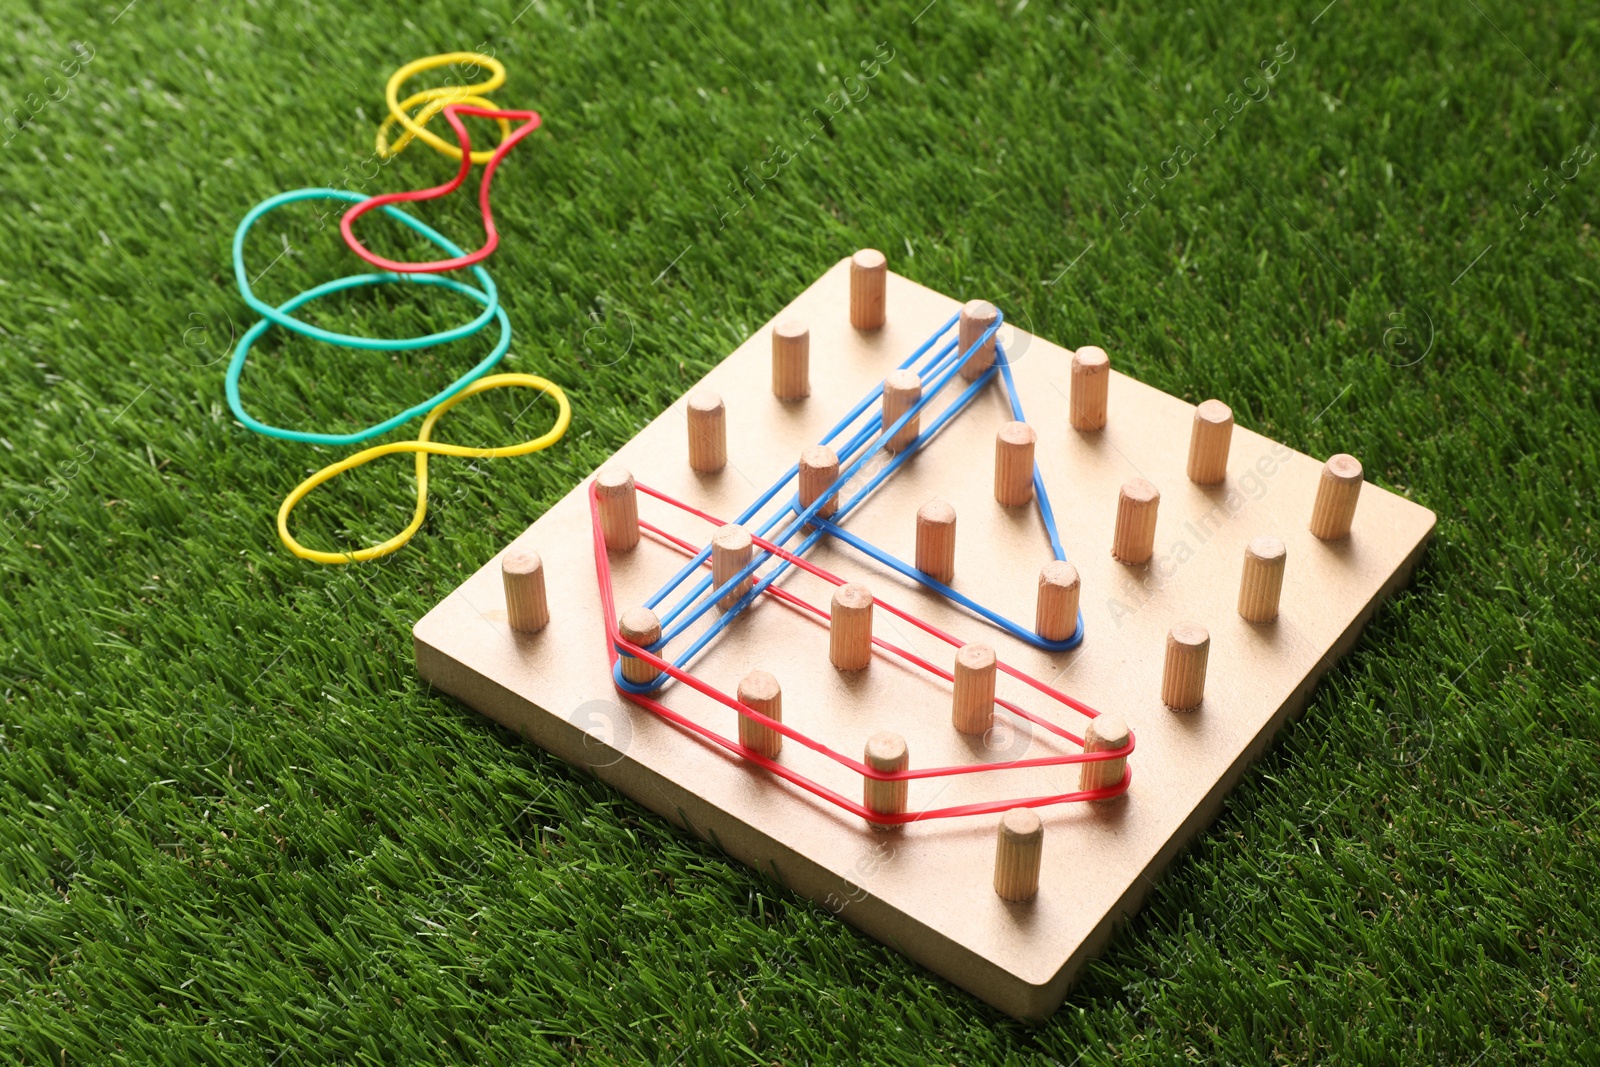 Photo of Wooden geoboard with boat made of rubber bands on artificial grass. Educational toy for motor skills development